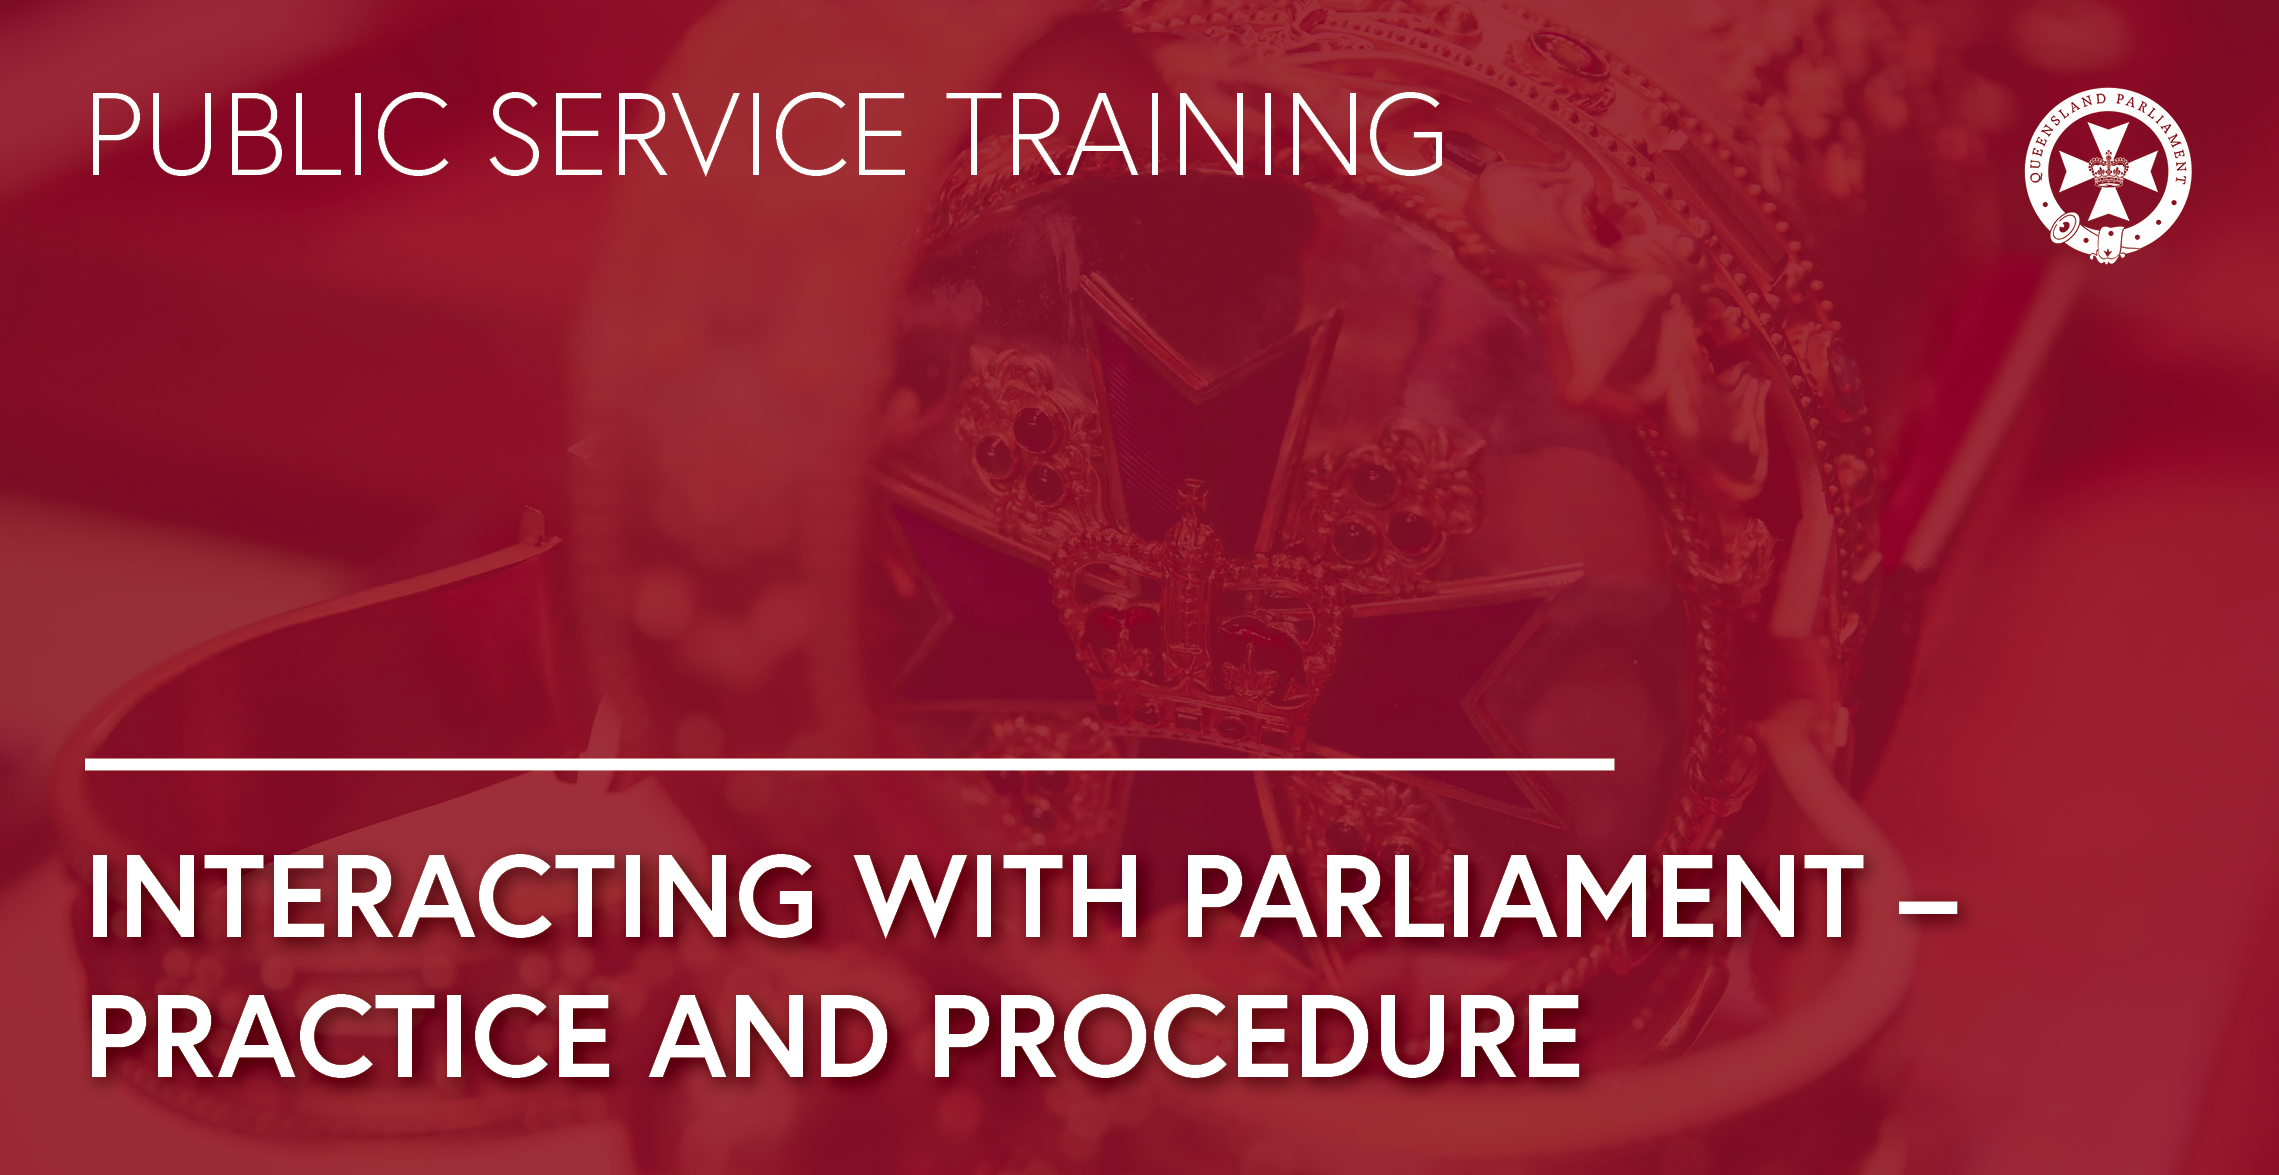 Interacting with Parliament - Practice and Procedure